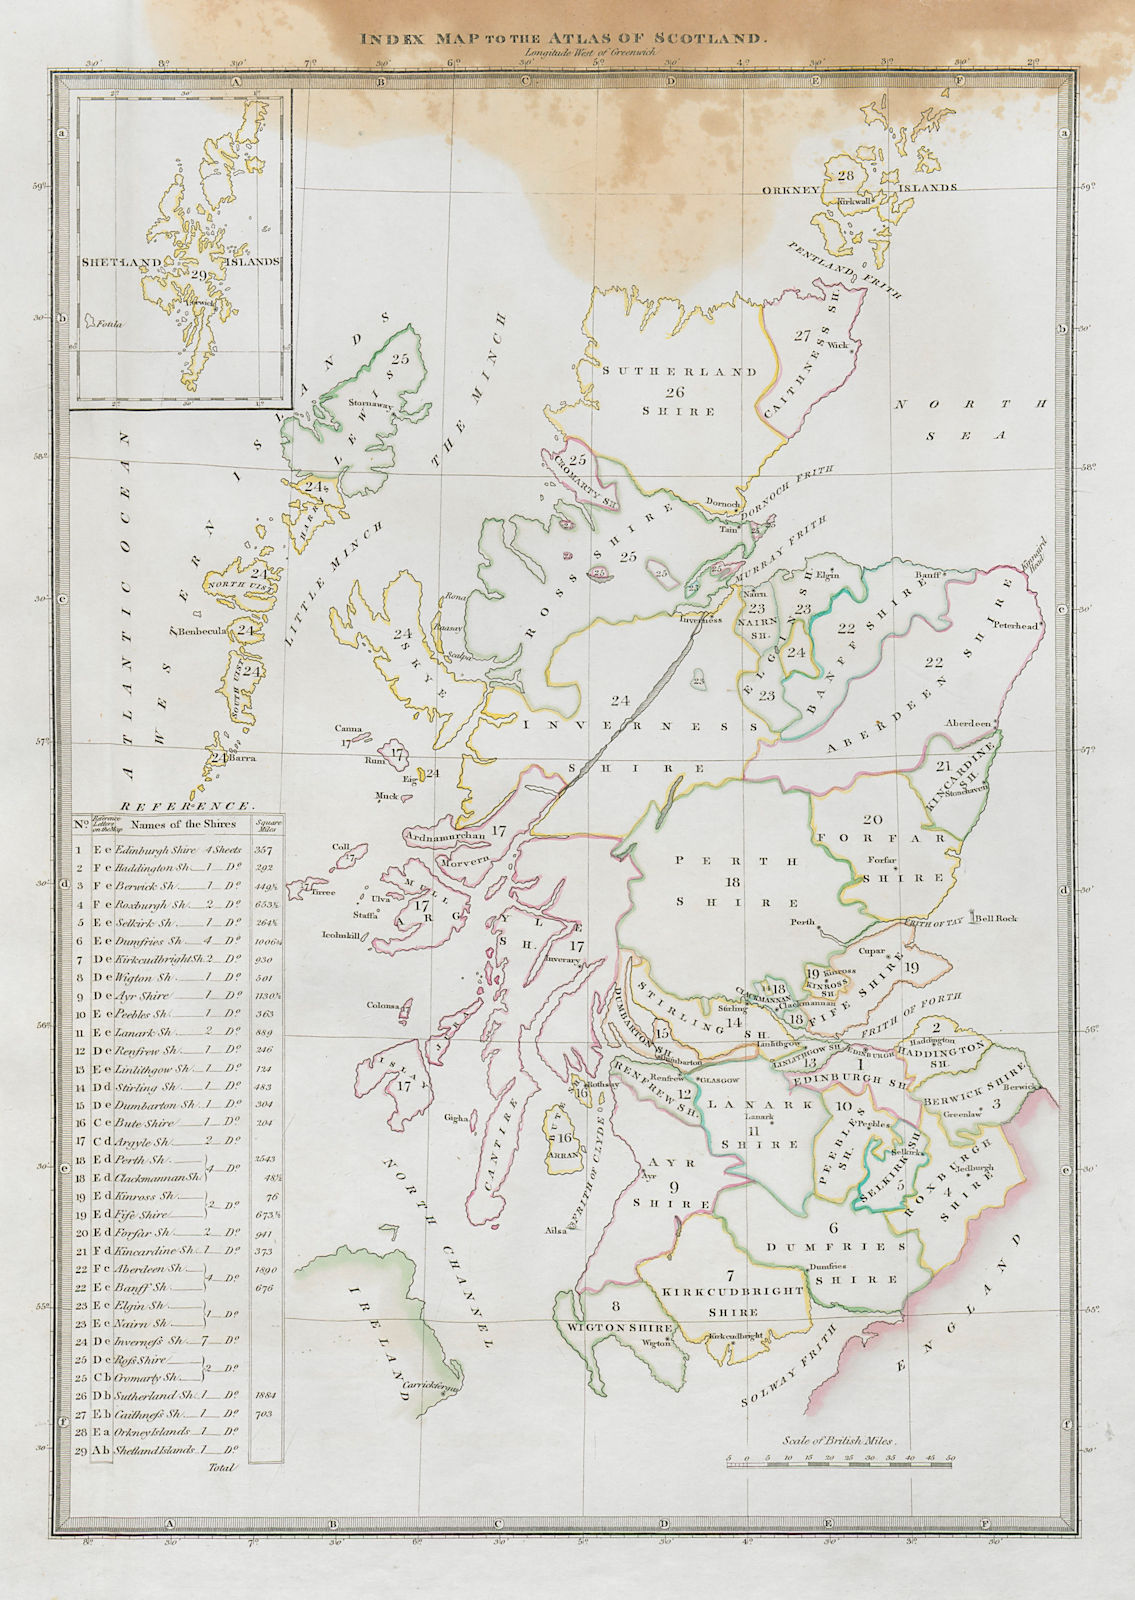 Associate Product Index map to the Atlas of Scotland. Counties/Shires. THOMSON 1832 old